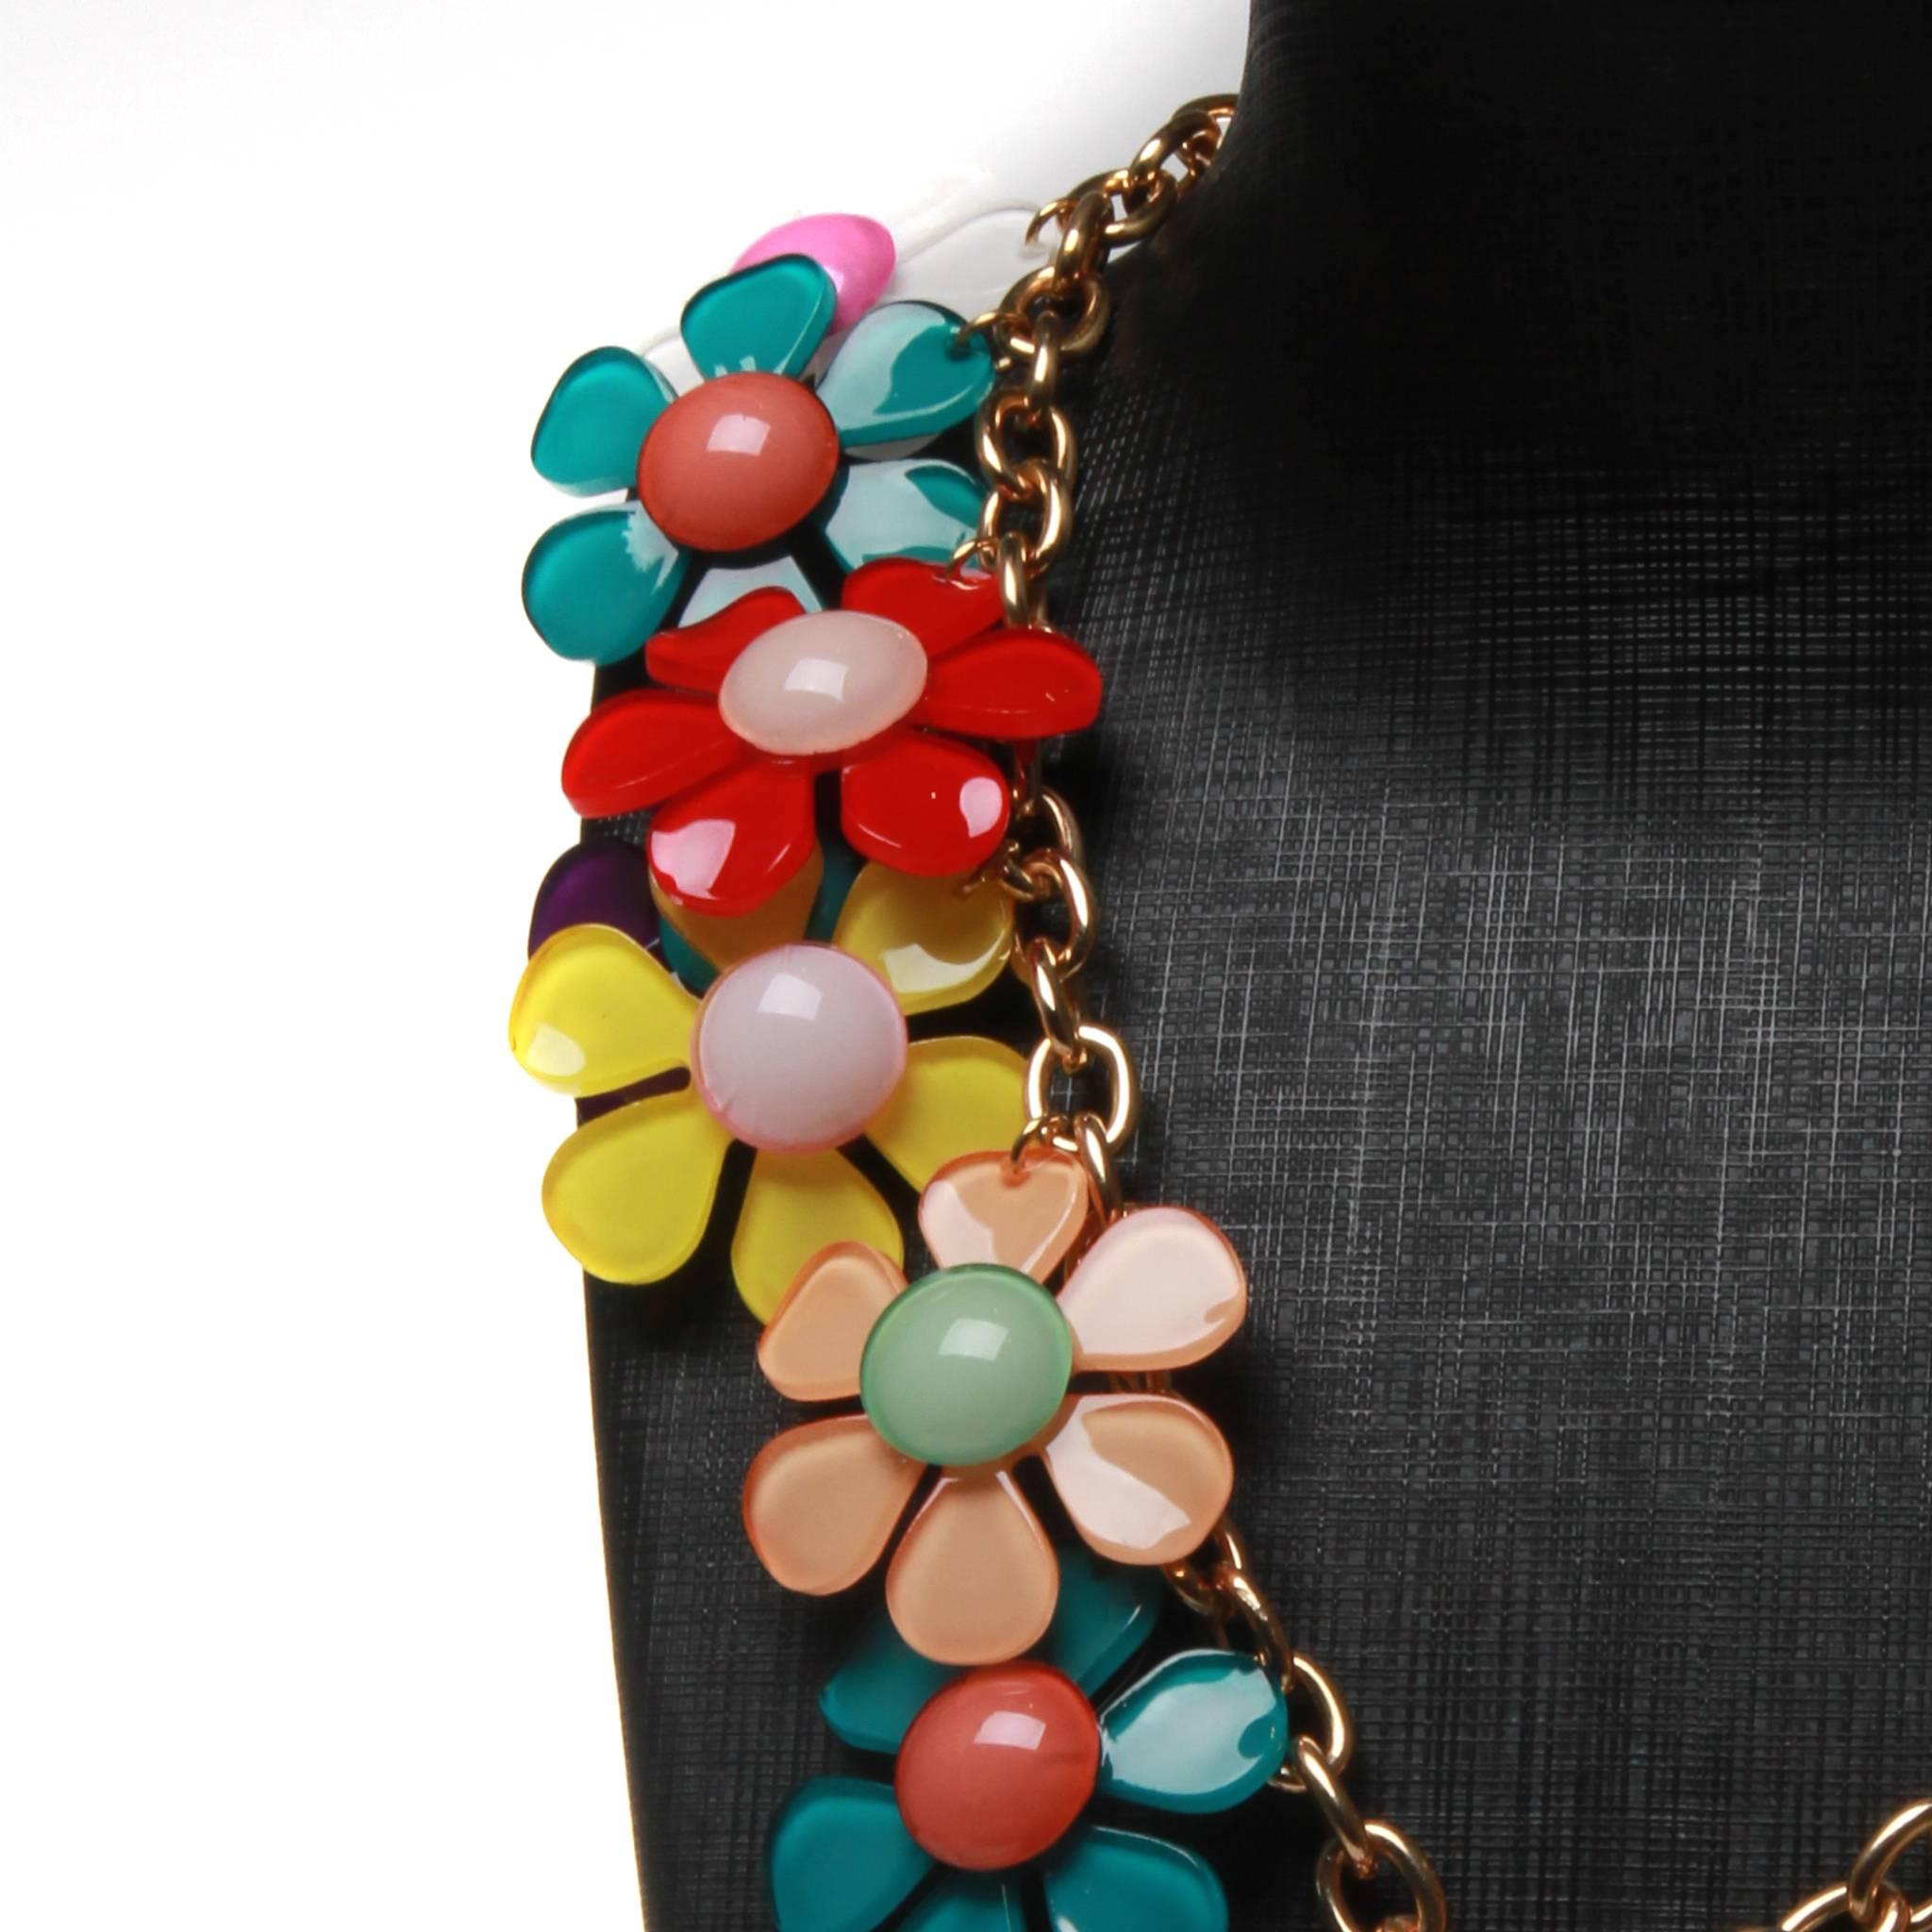 This stunning necklace is an impossible to find piece.  A true investment piece from the fashion guru himself. 
Guaranteed to brighten your day, you will love wearing this eye-catching necklace. 
The flowers are in beautiful bright colours and